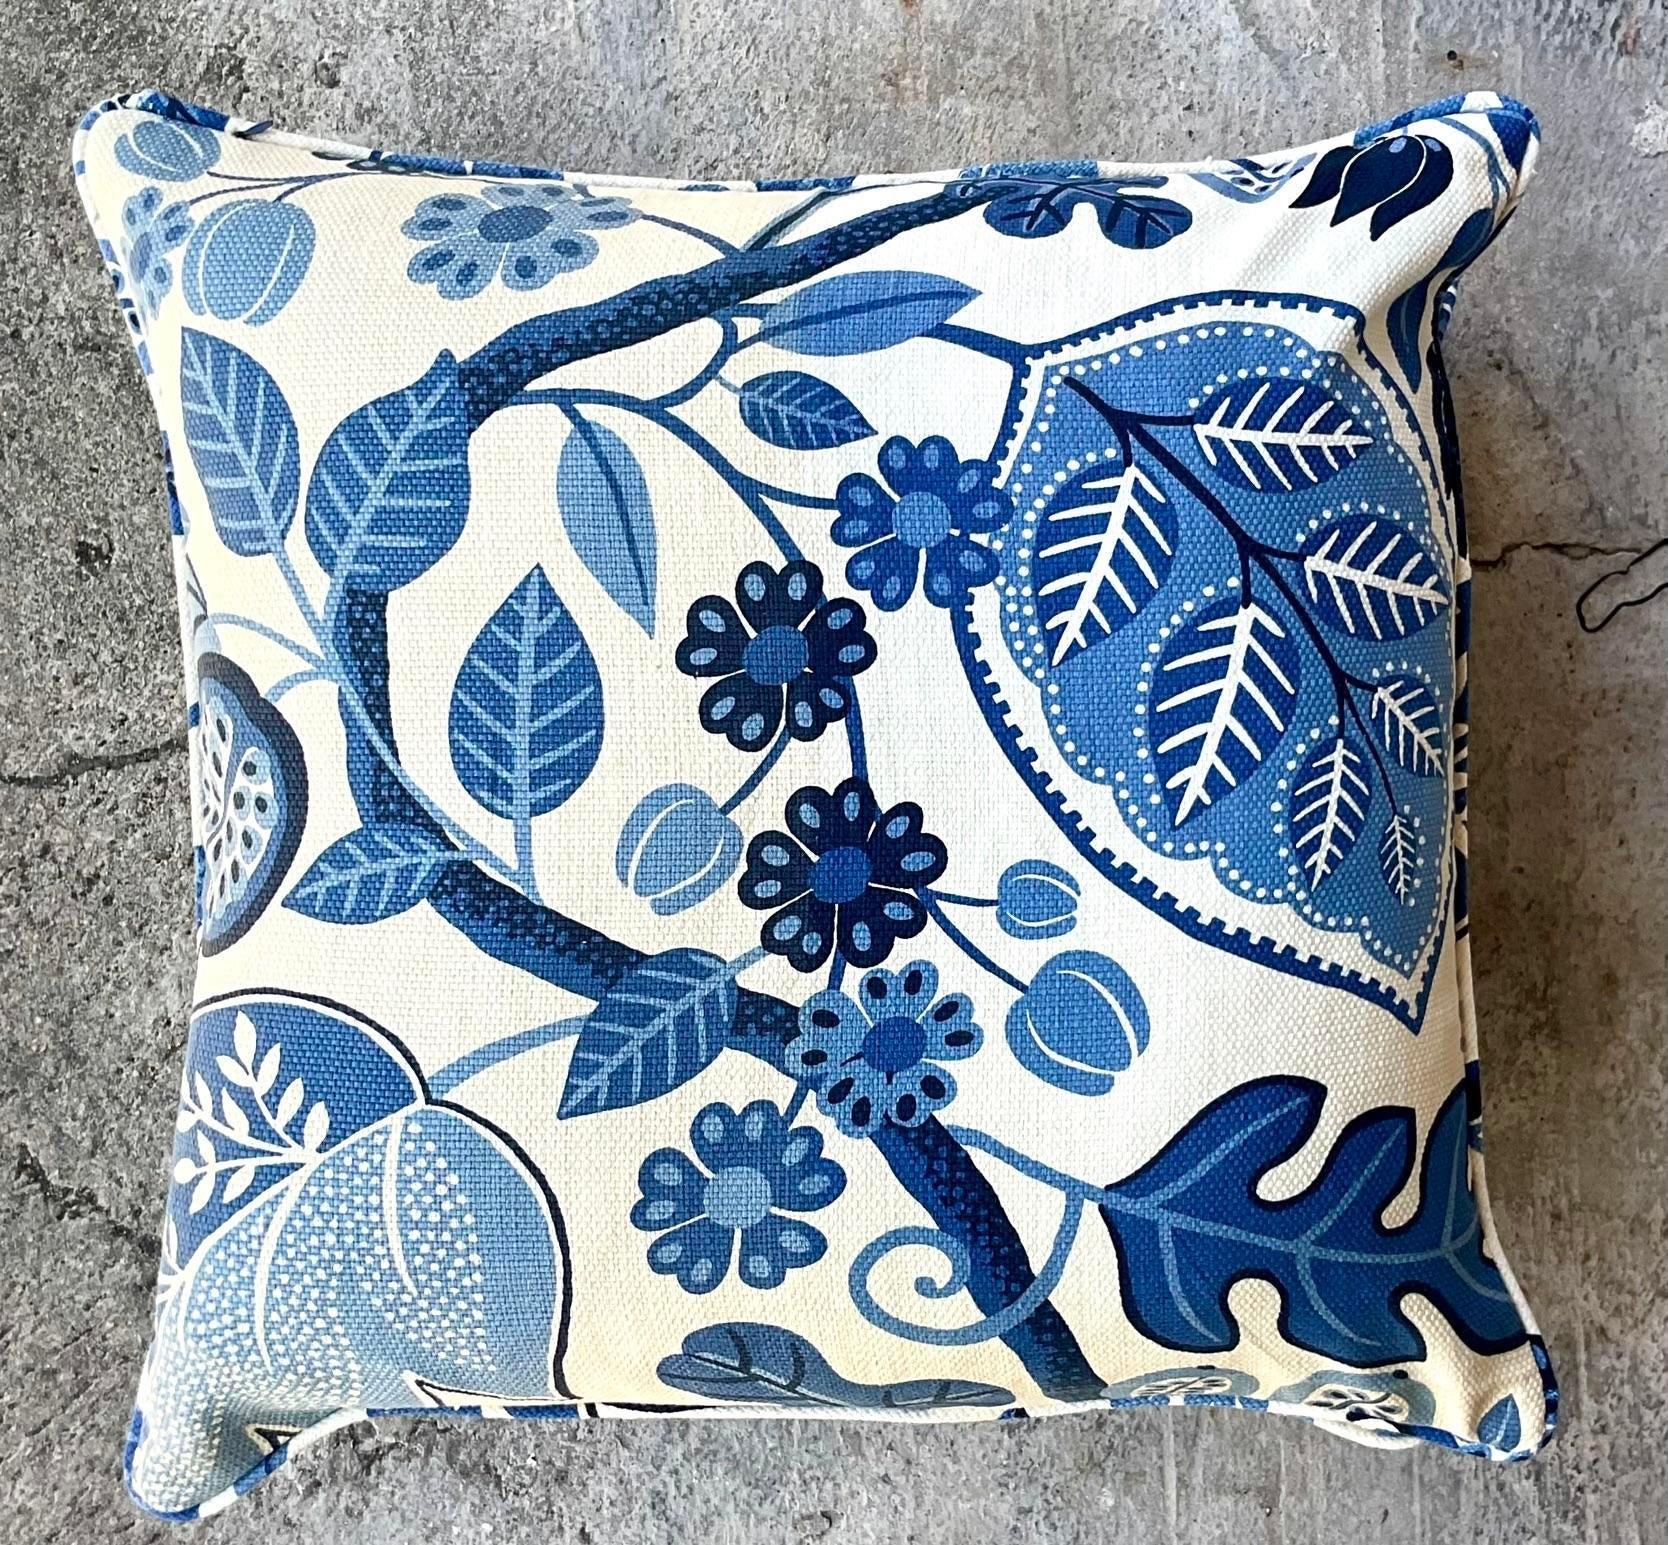 A gorgeous vintage Coastal throw pillow. A beautiful printed blue and white floral on a linen cotton upholstery fabric. Down filled insert. Two pillows available on my Chairish page. Acquired from a Palm Beach estate. 